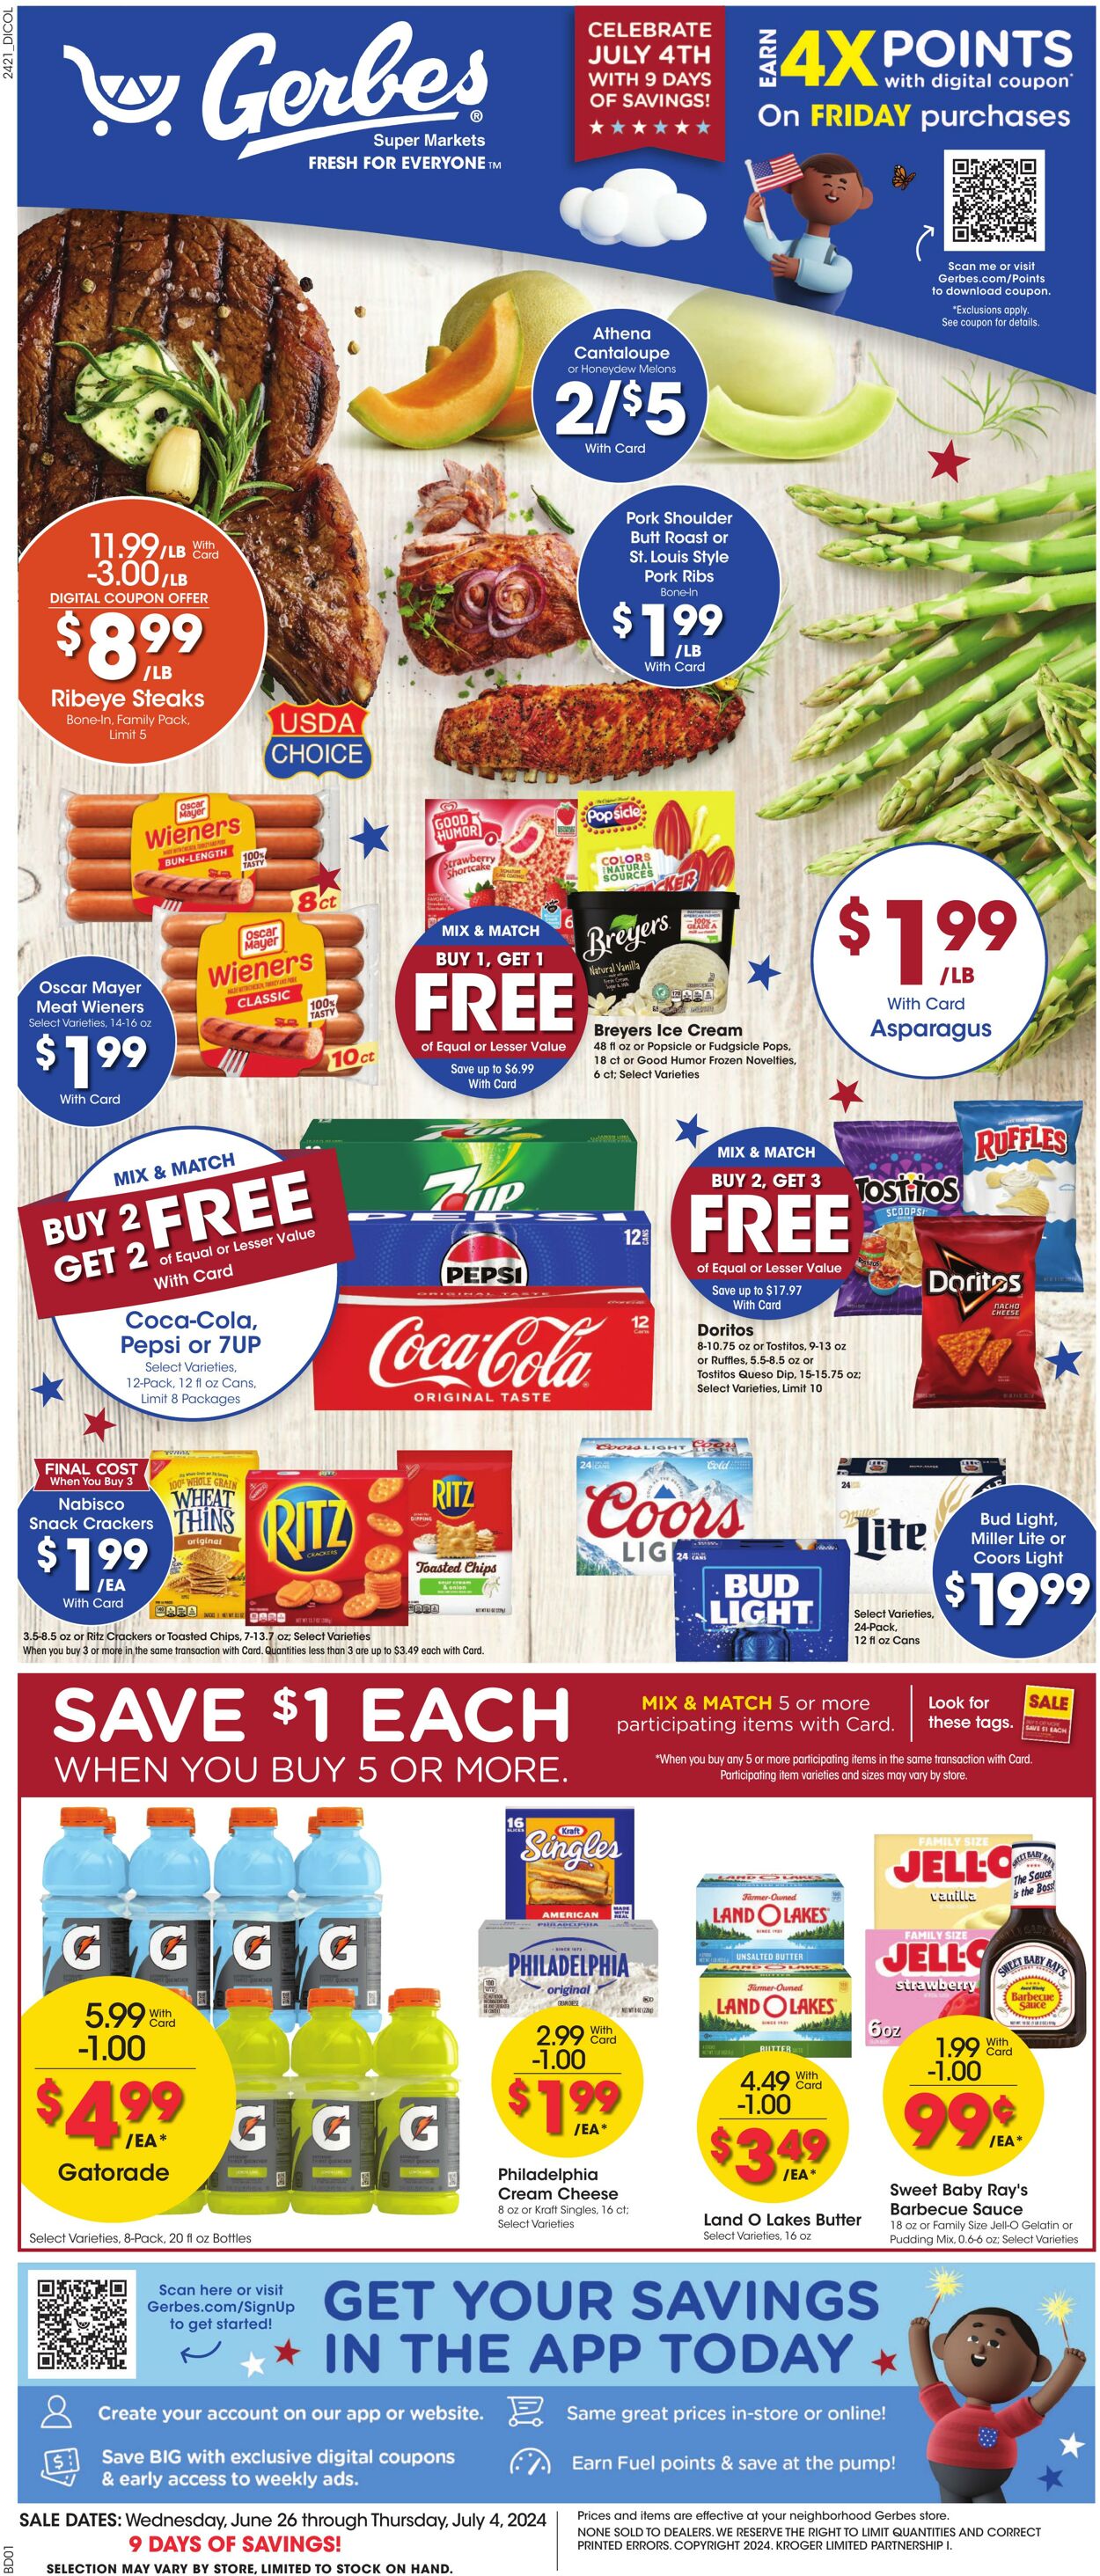 Gerbes Supermarkets Promotional weekly ads